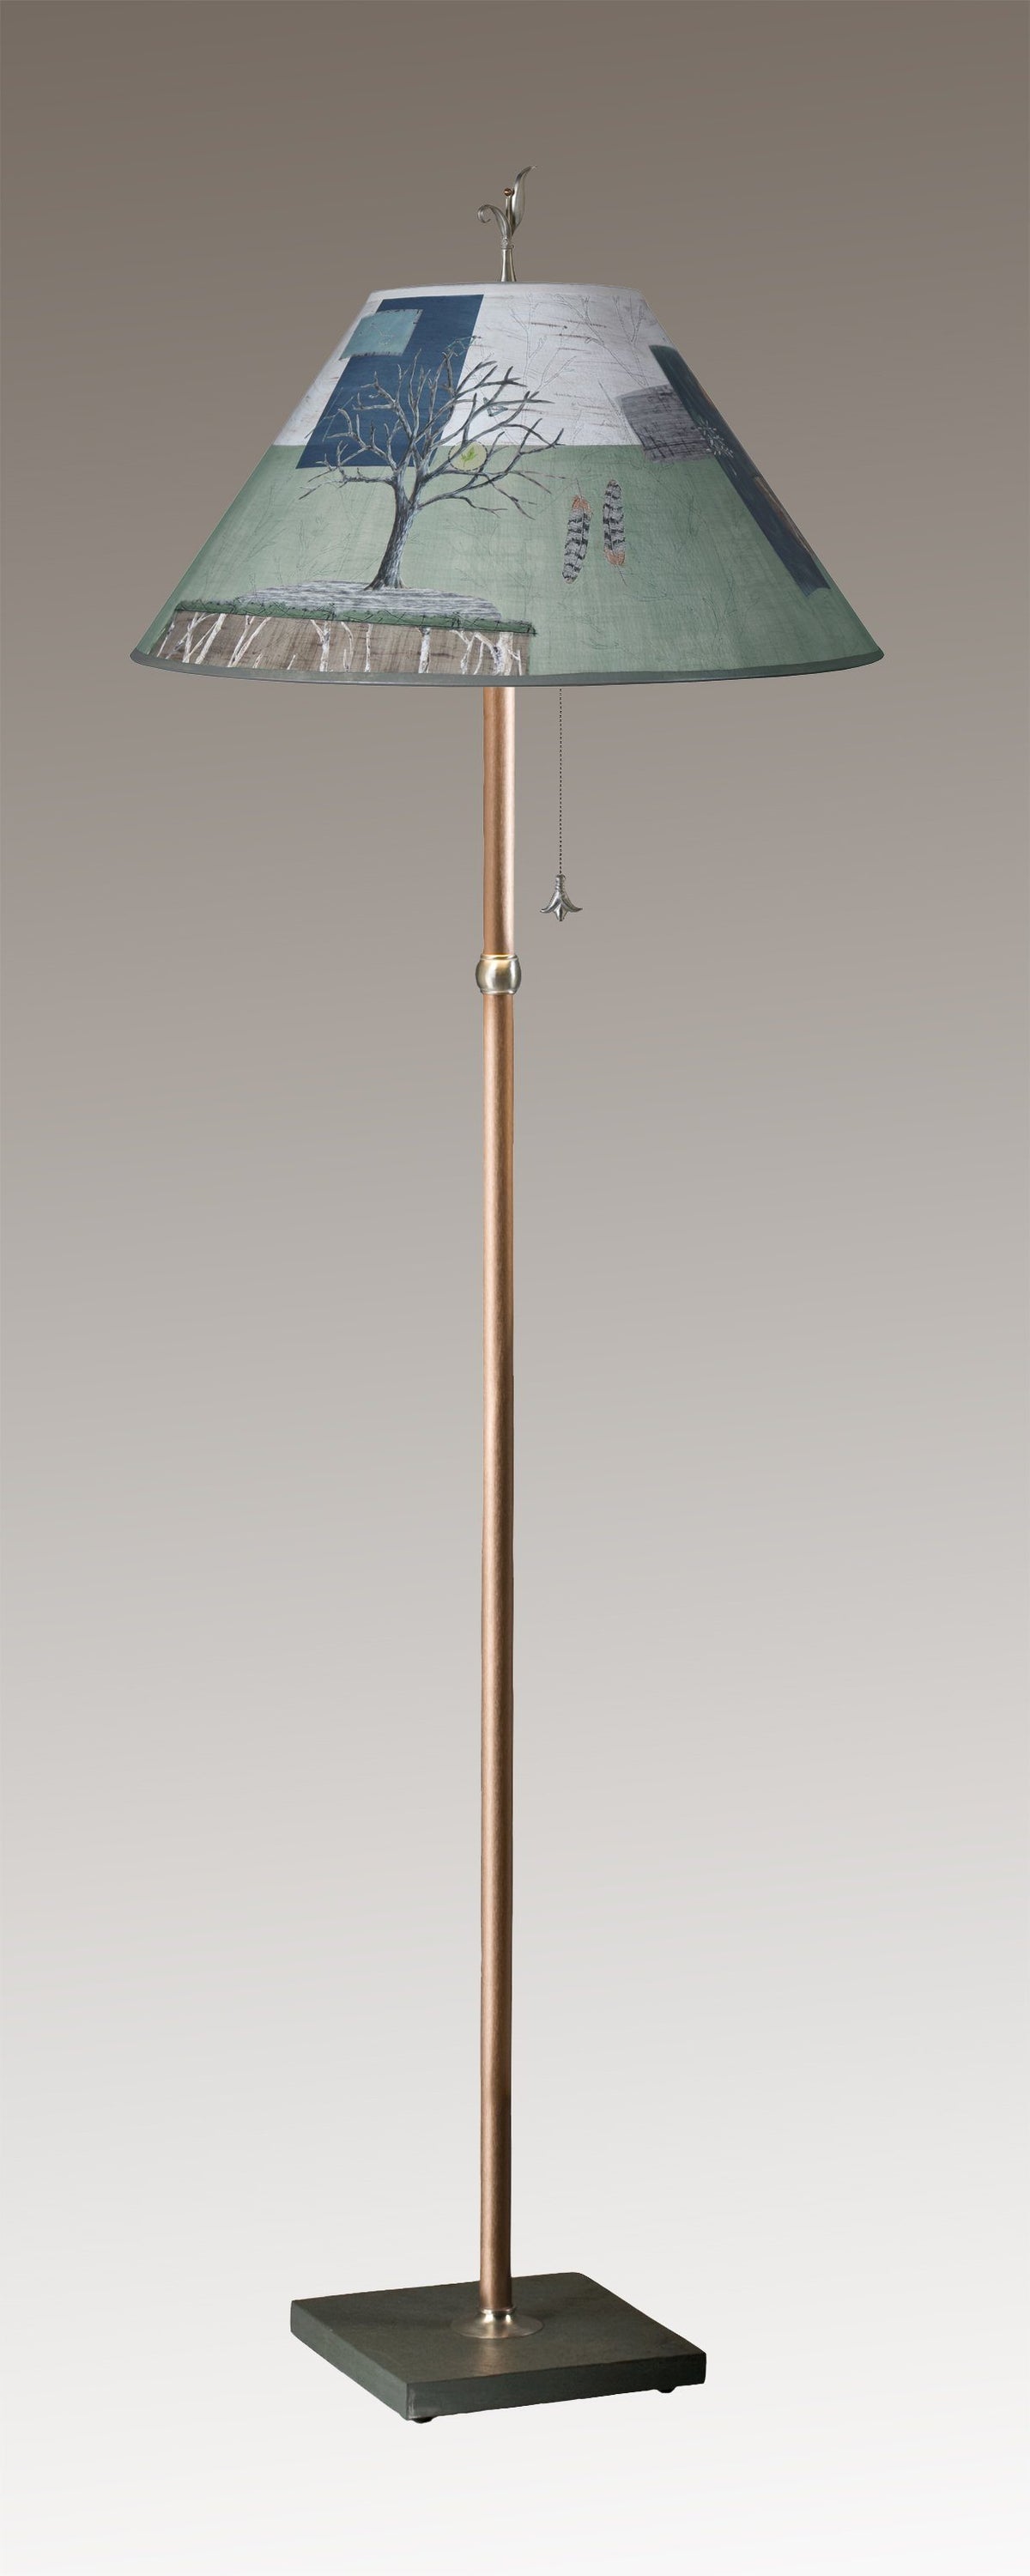 Copper Floor Lamp with Large Conical Shade in Wander in Field